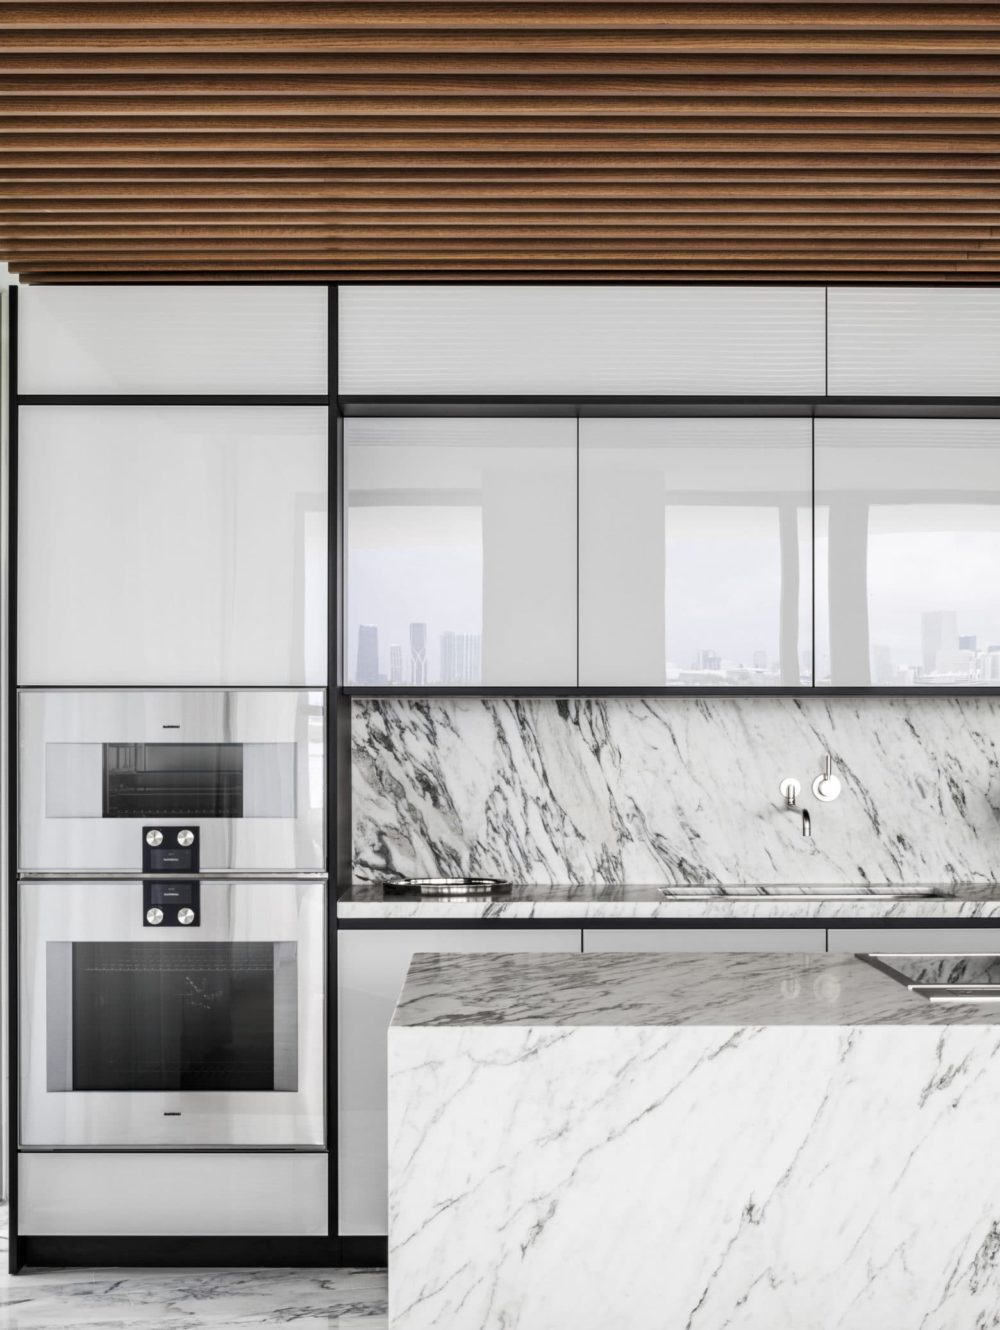 Kitchen at Monad Terrace luxury condominiums in Miami. Stone island and backsplash with white cabinets and appliances.